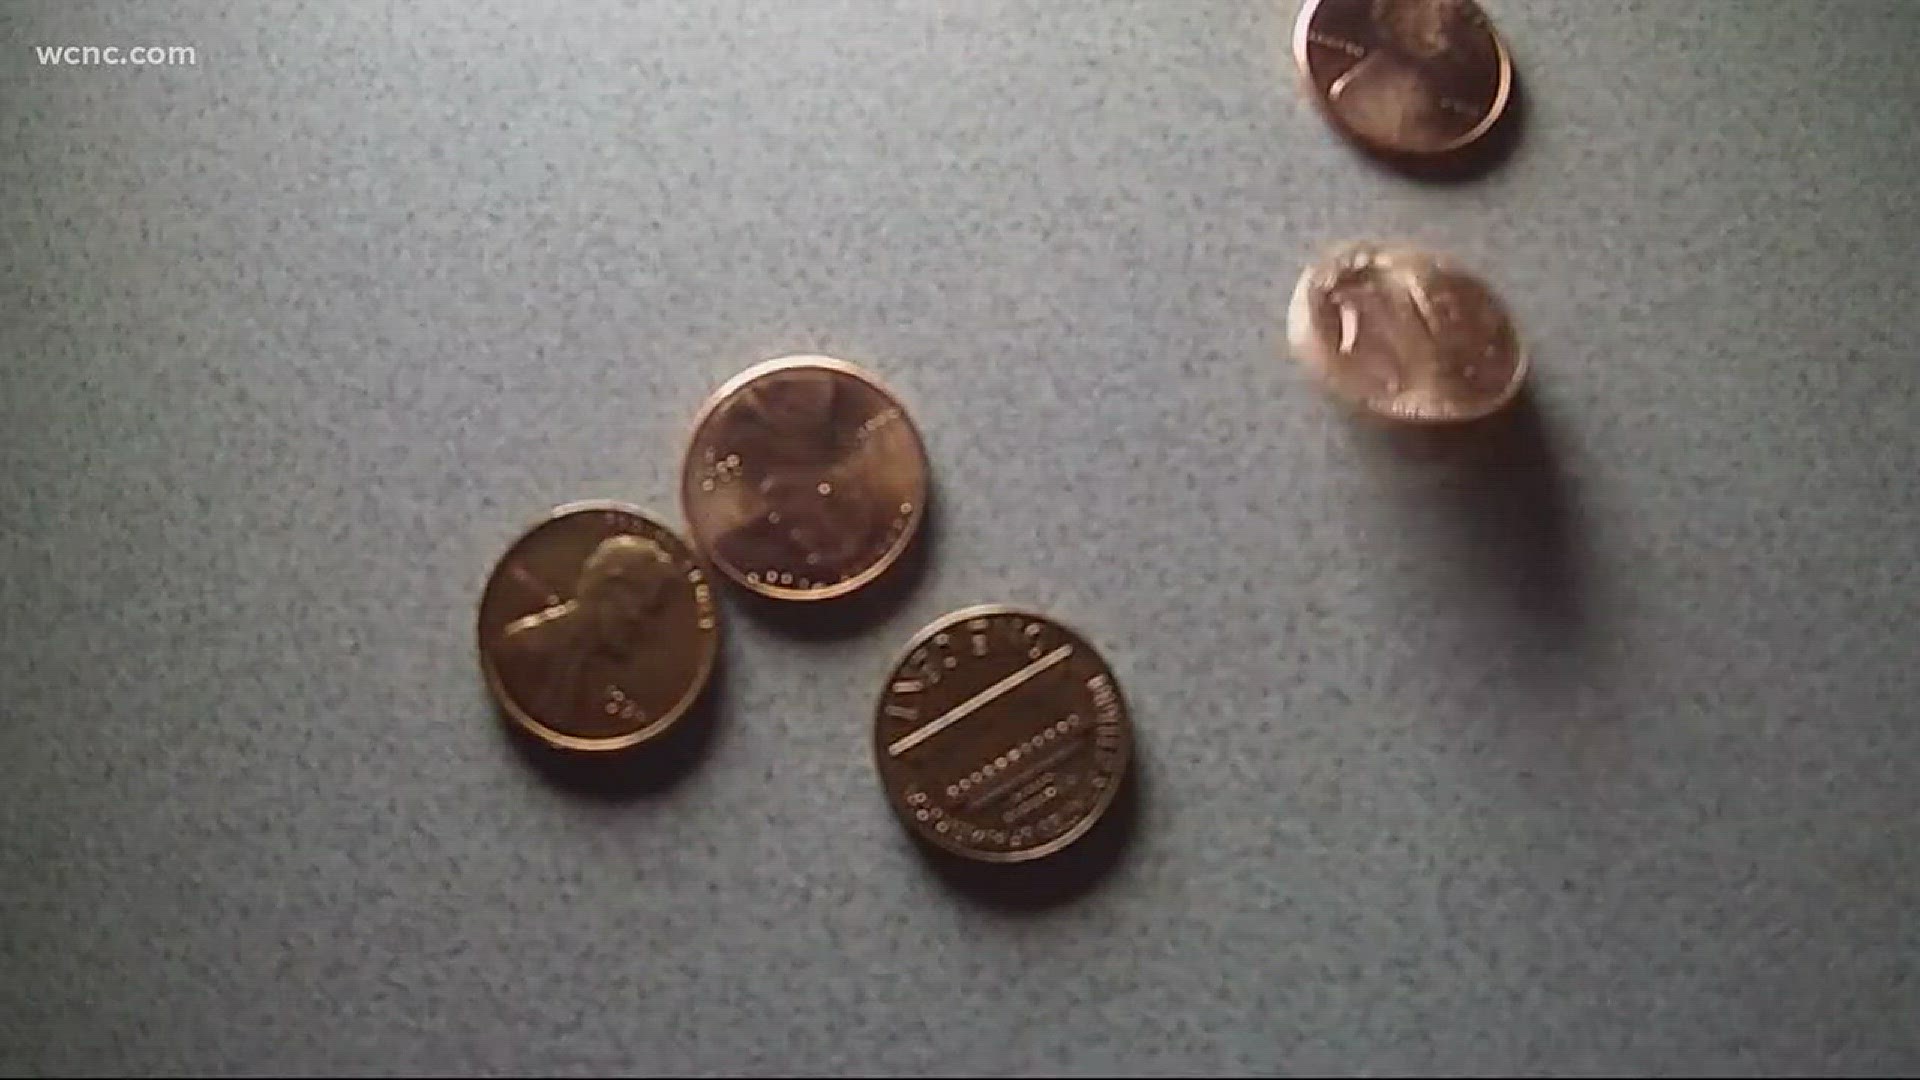 In York County, voters renewed "Pennies for Progres" to continues for the next seven years.